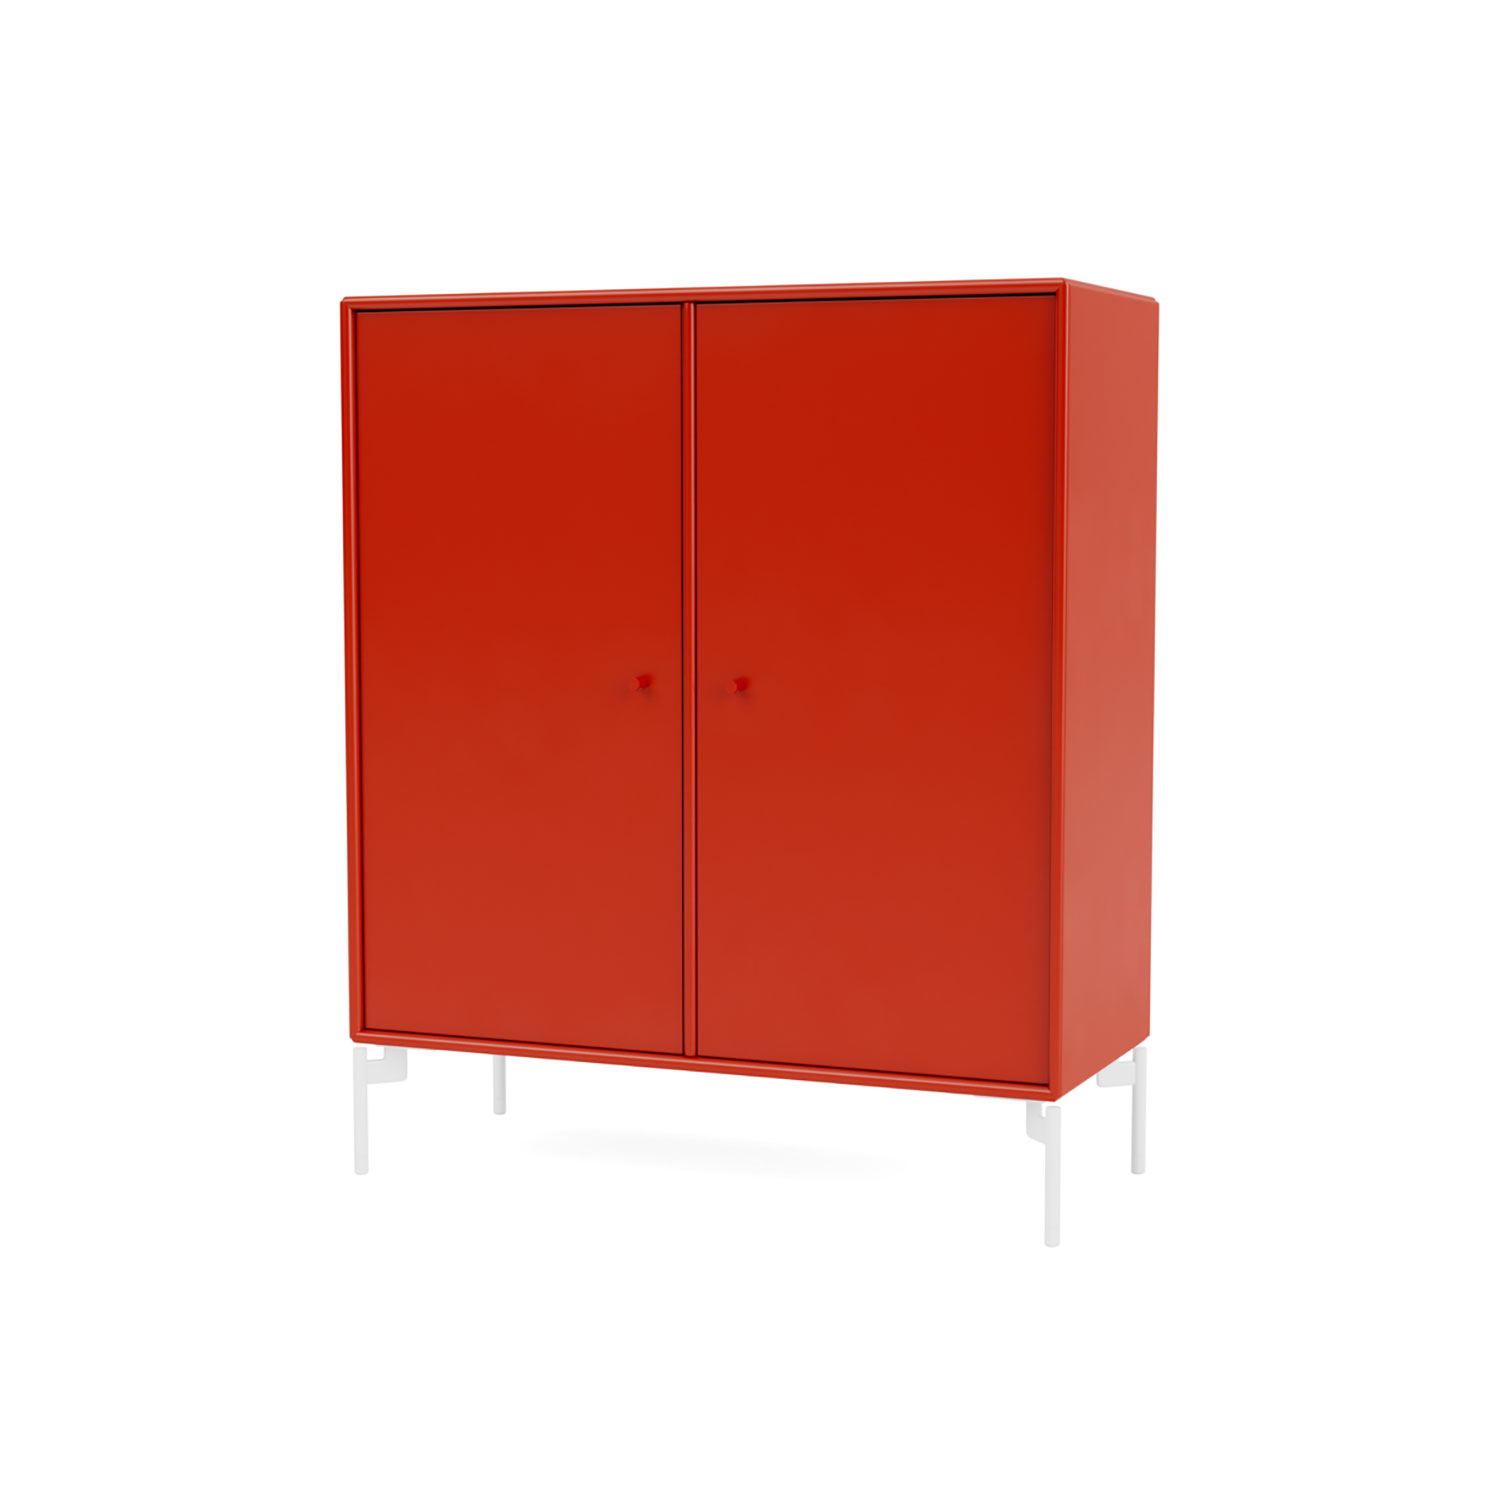 COVER Cabinet 1118, Rosehip